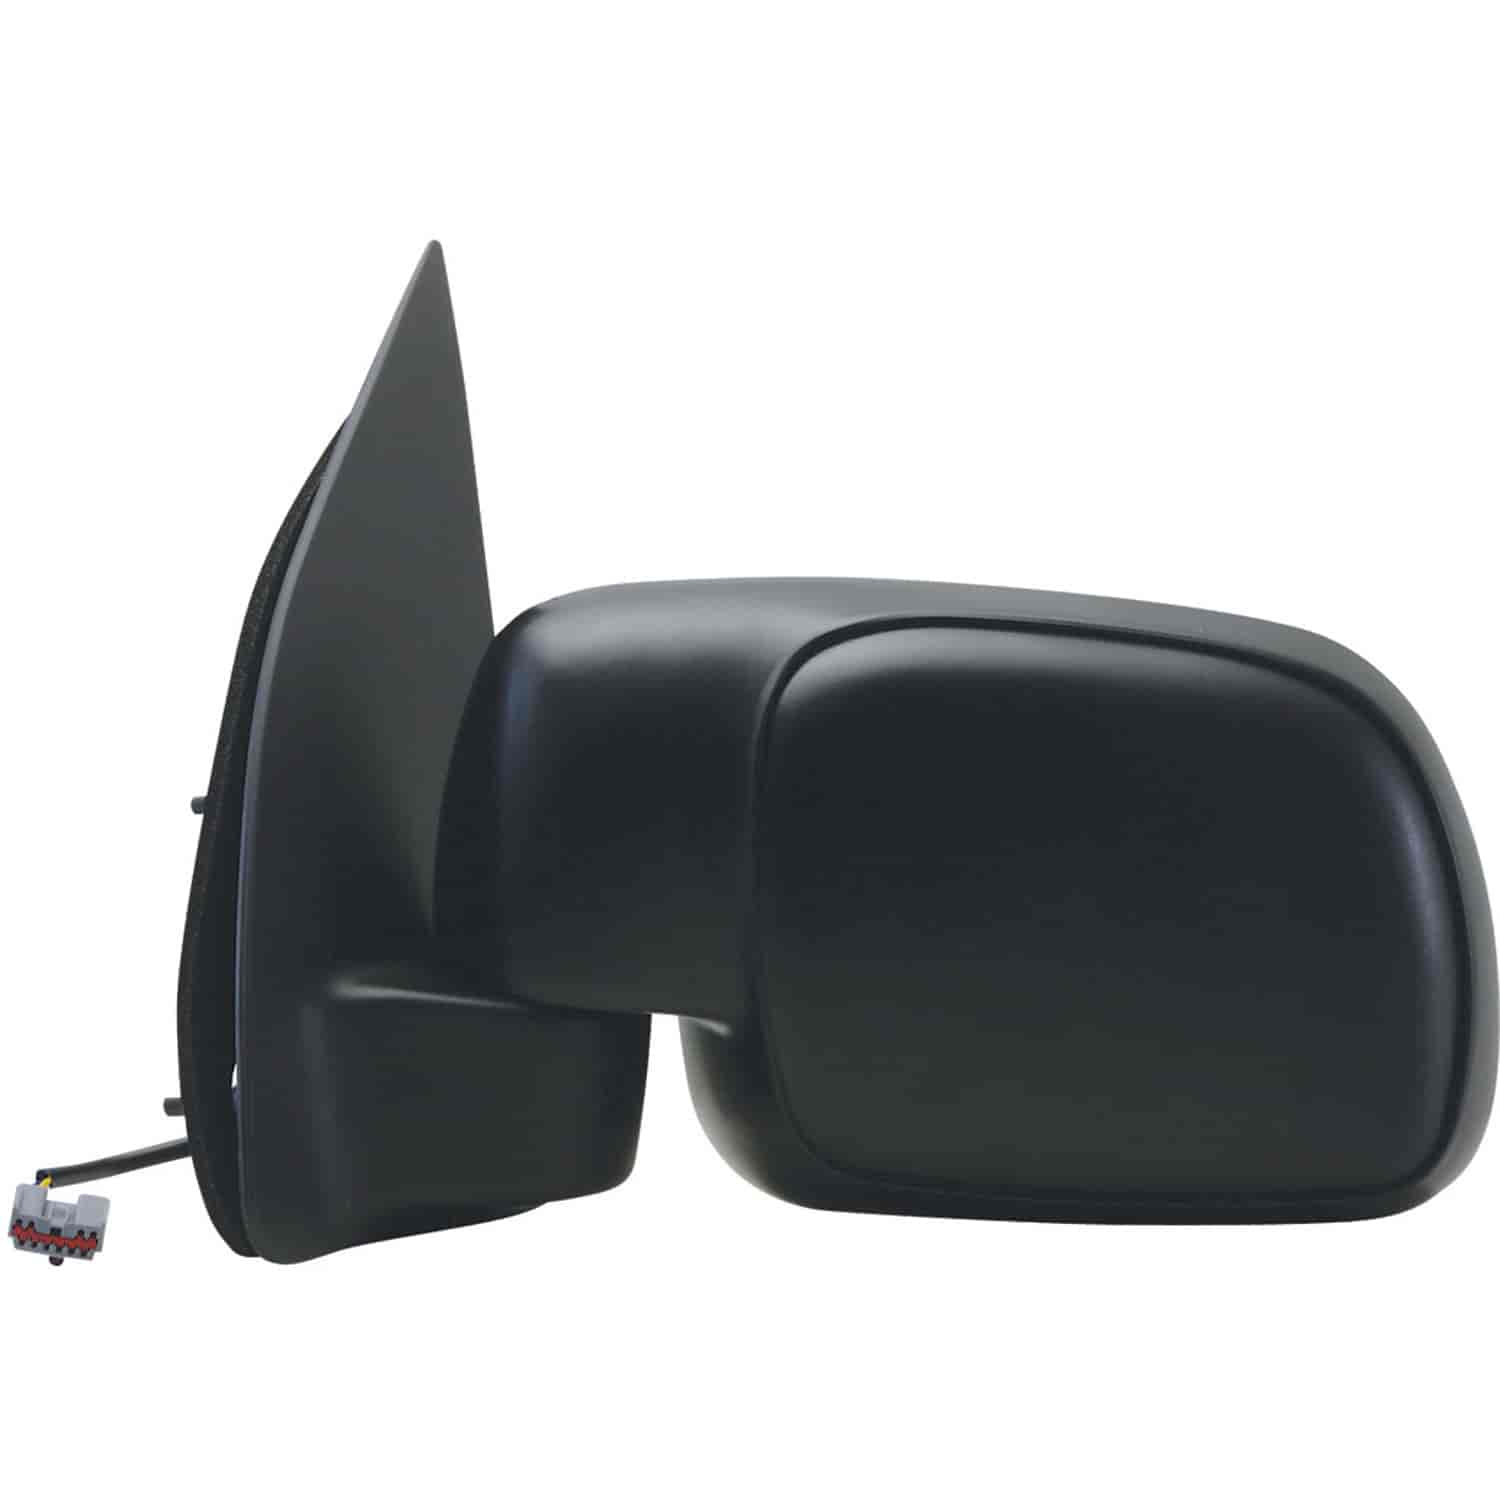 OEM Style Replacement mirror for 01-07 Ford F250 F350 F450 F550 Super Duty Pick-Up driver side mirro